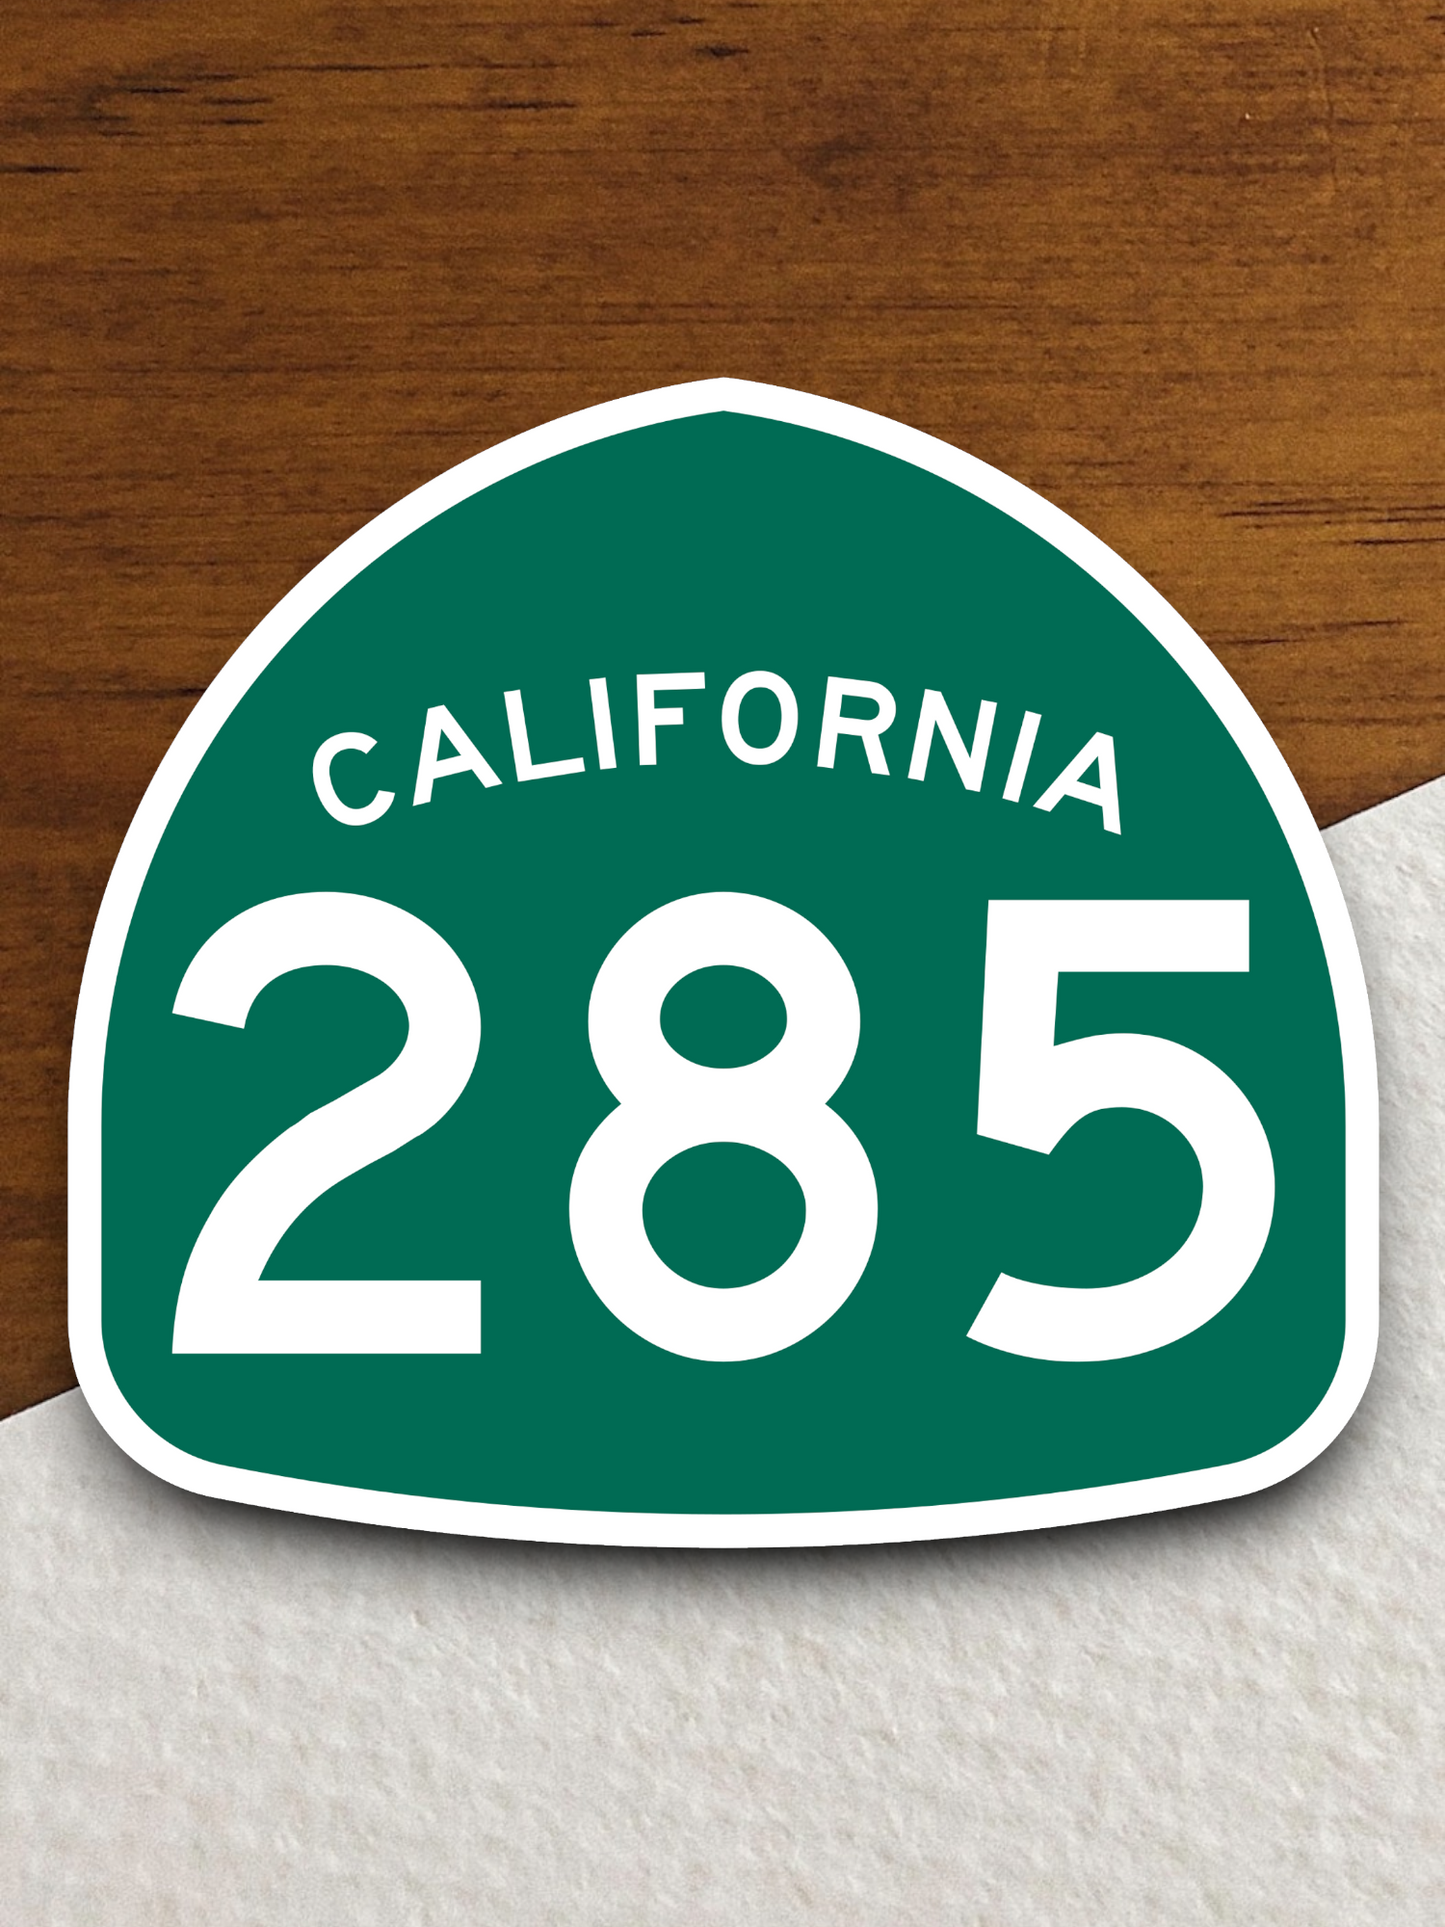 California State Route 285 Road Sign Sticker